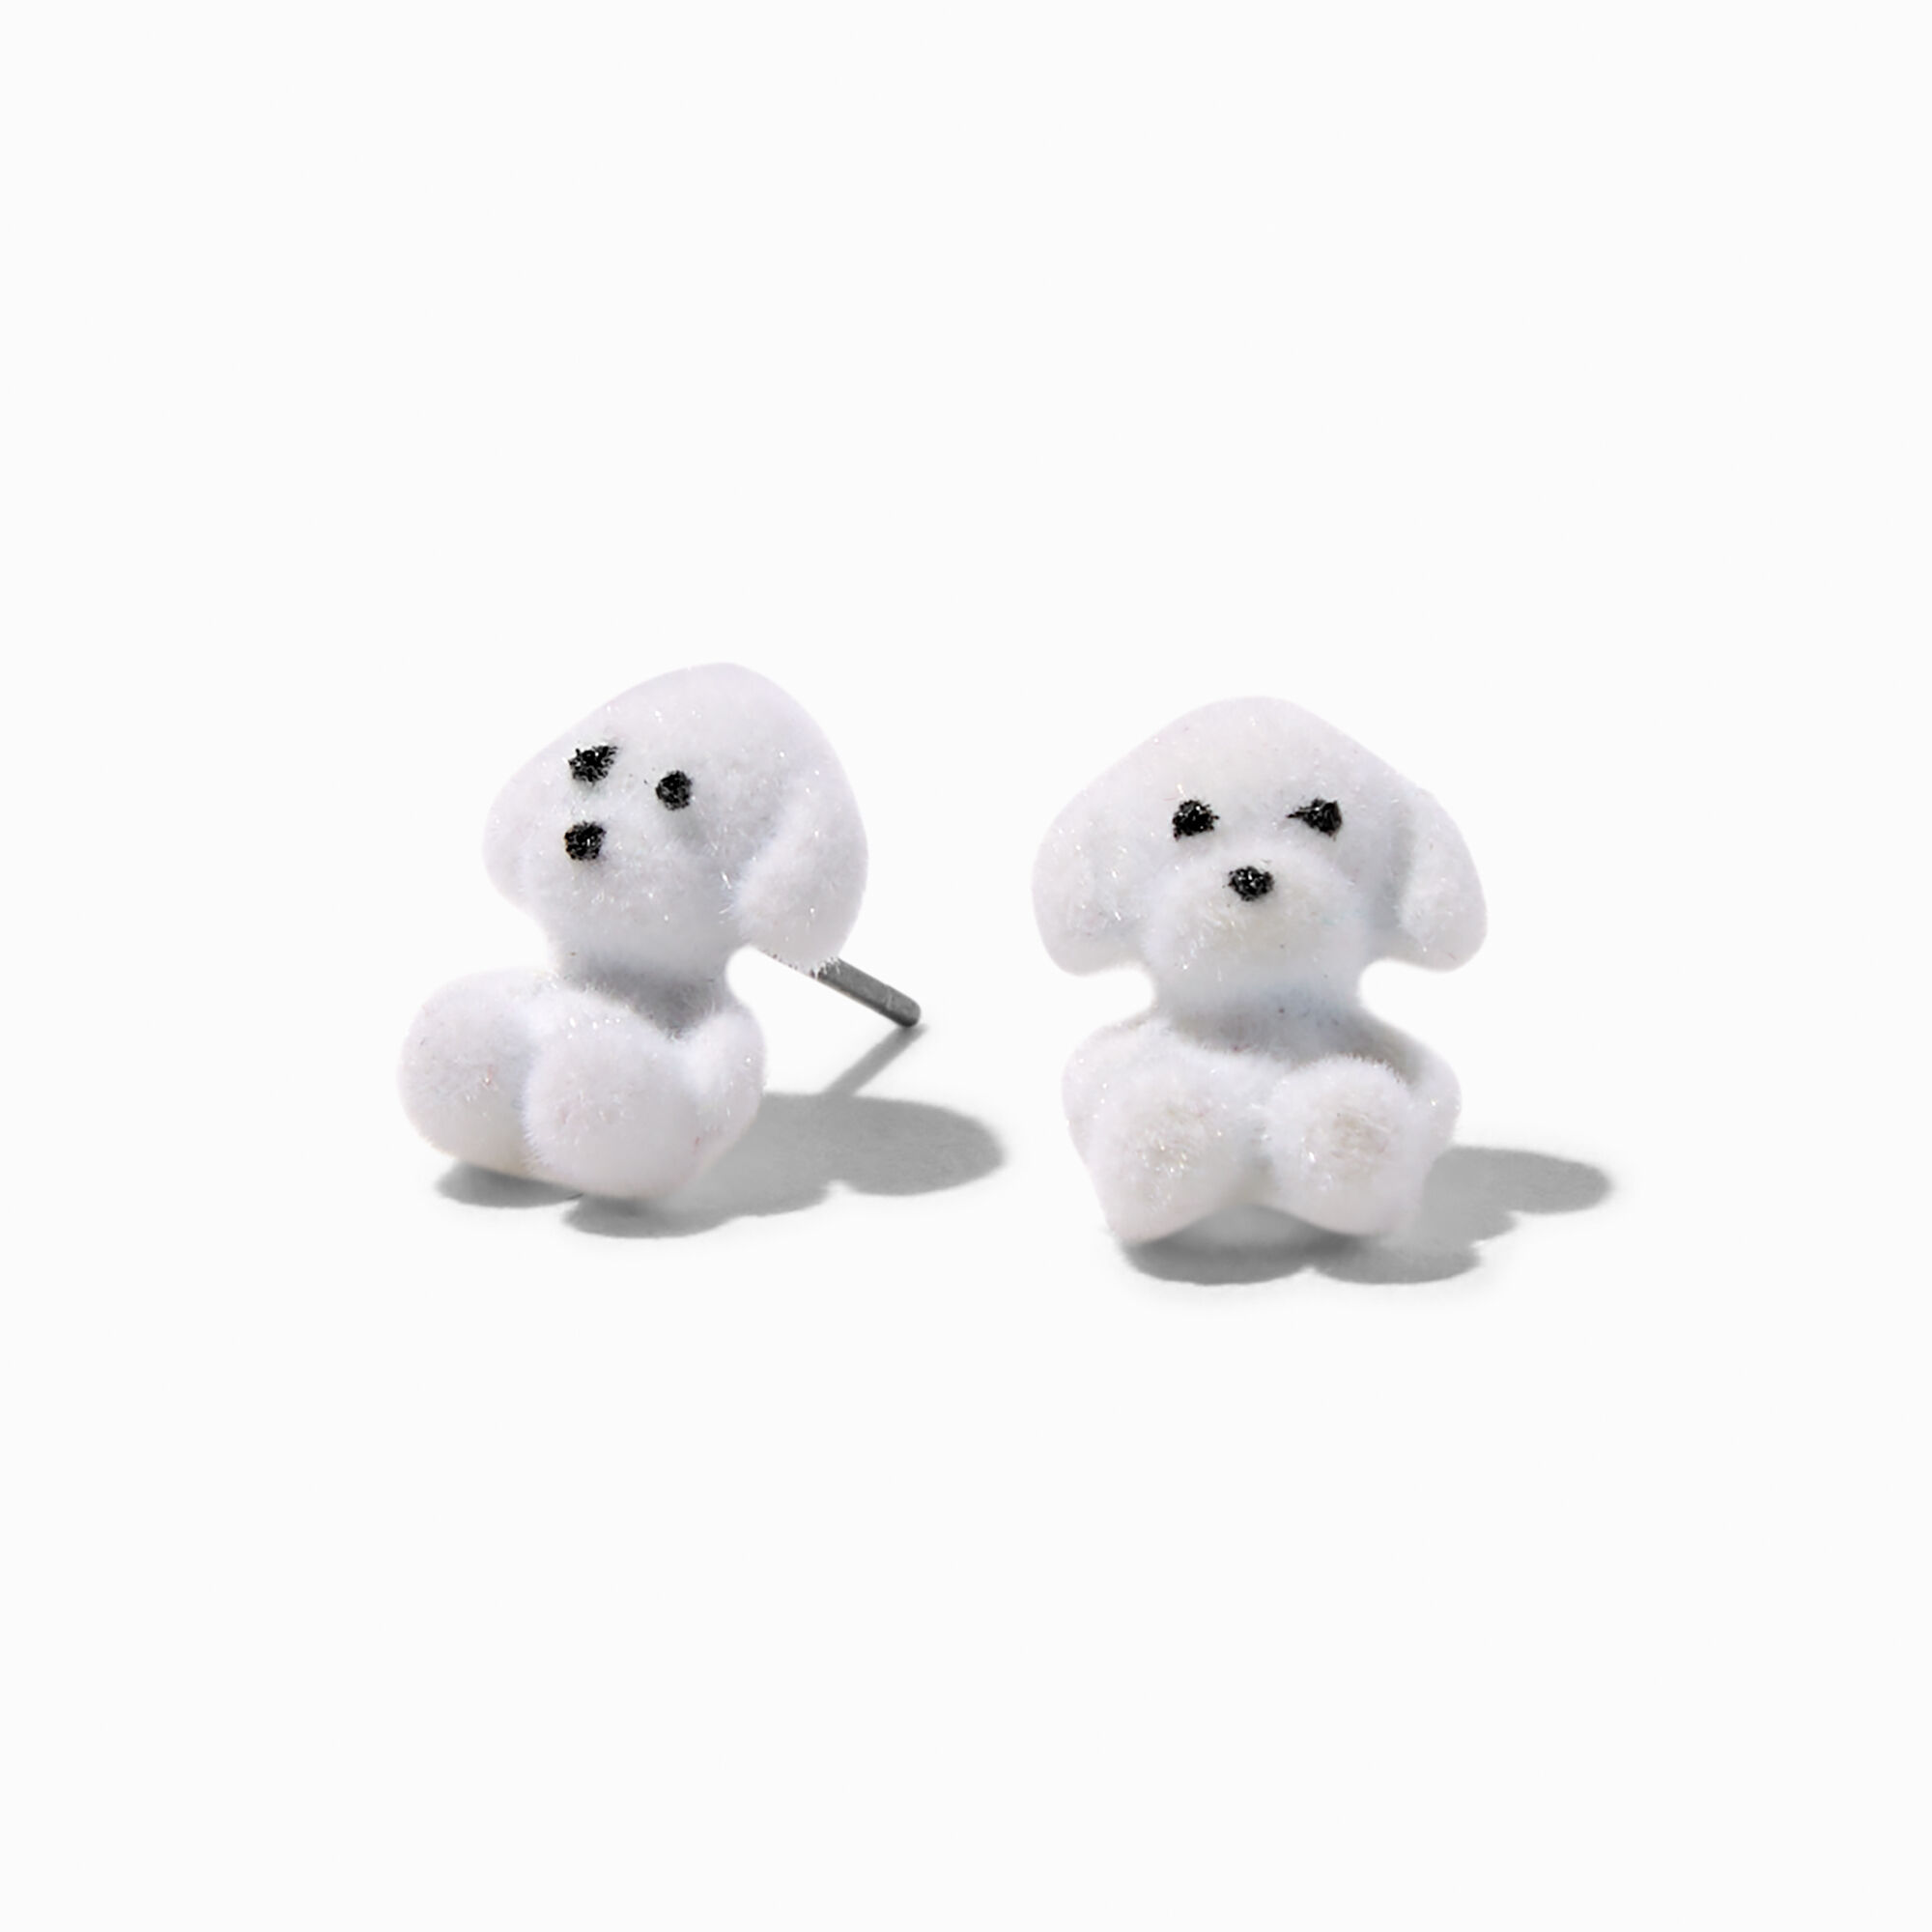 View Claires Fuzzy Puppy Stud Earrings information